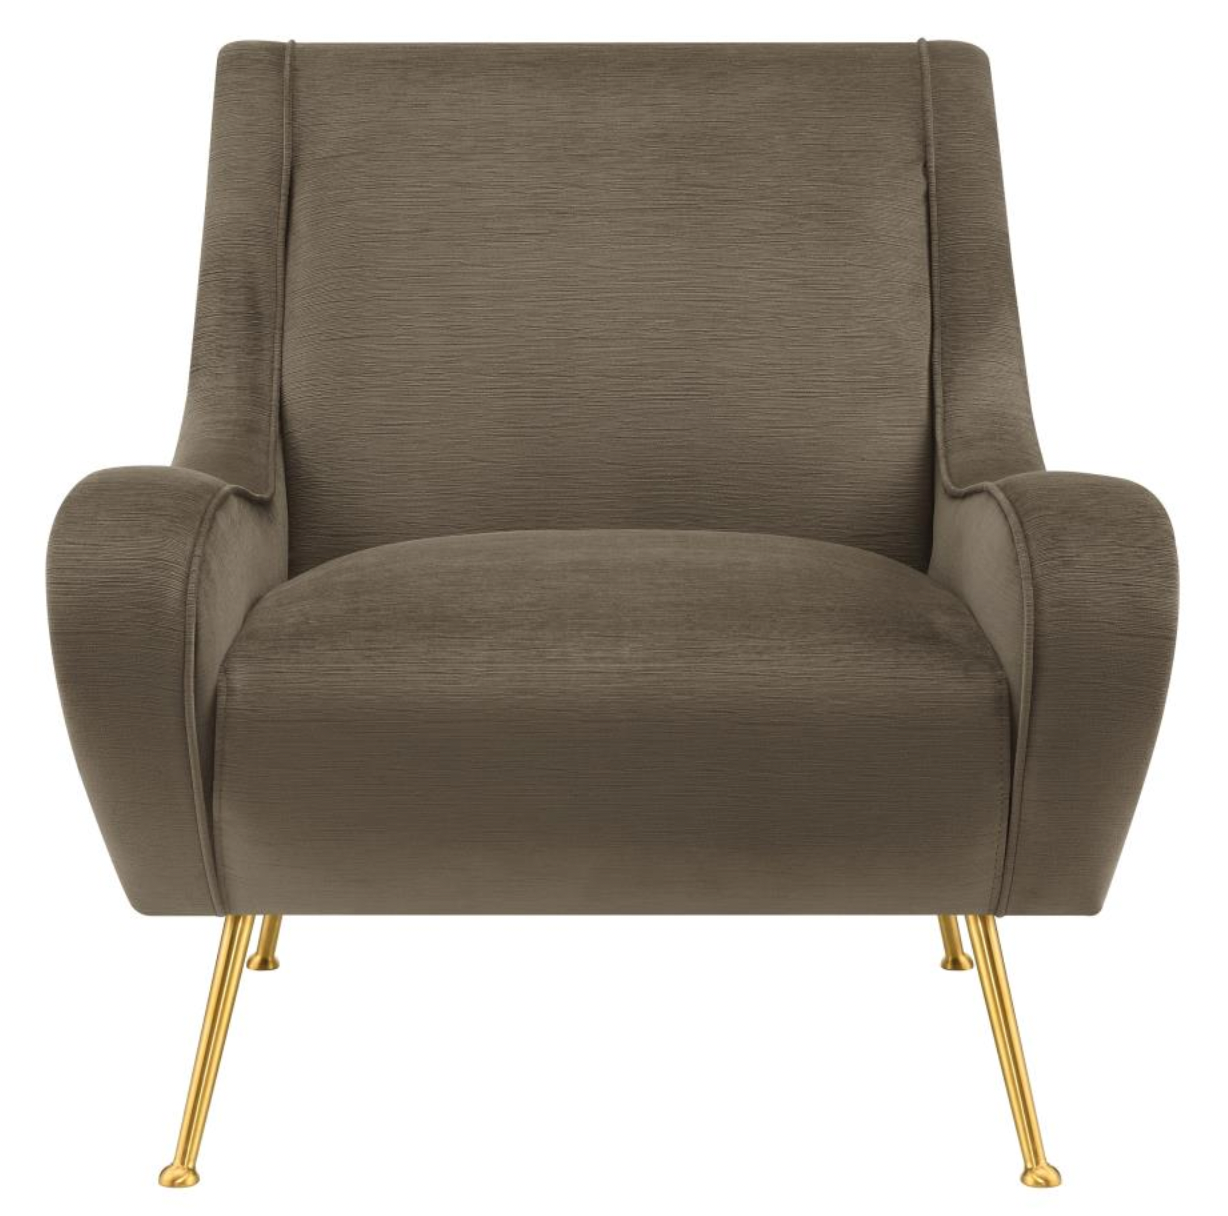 RICCI Upholstered Saddle Arms Accent Chair